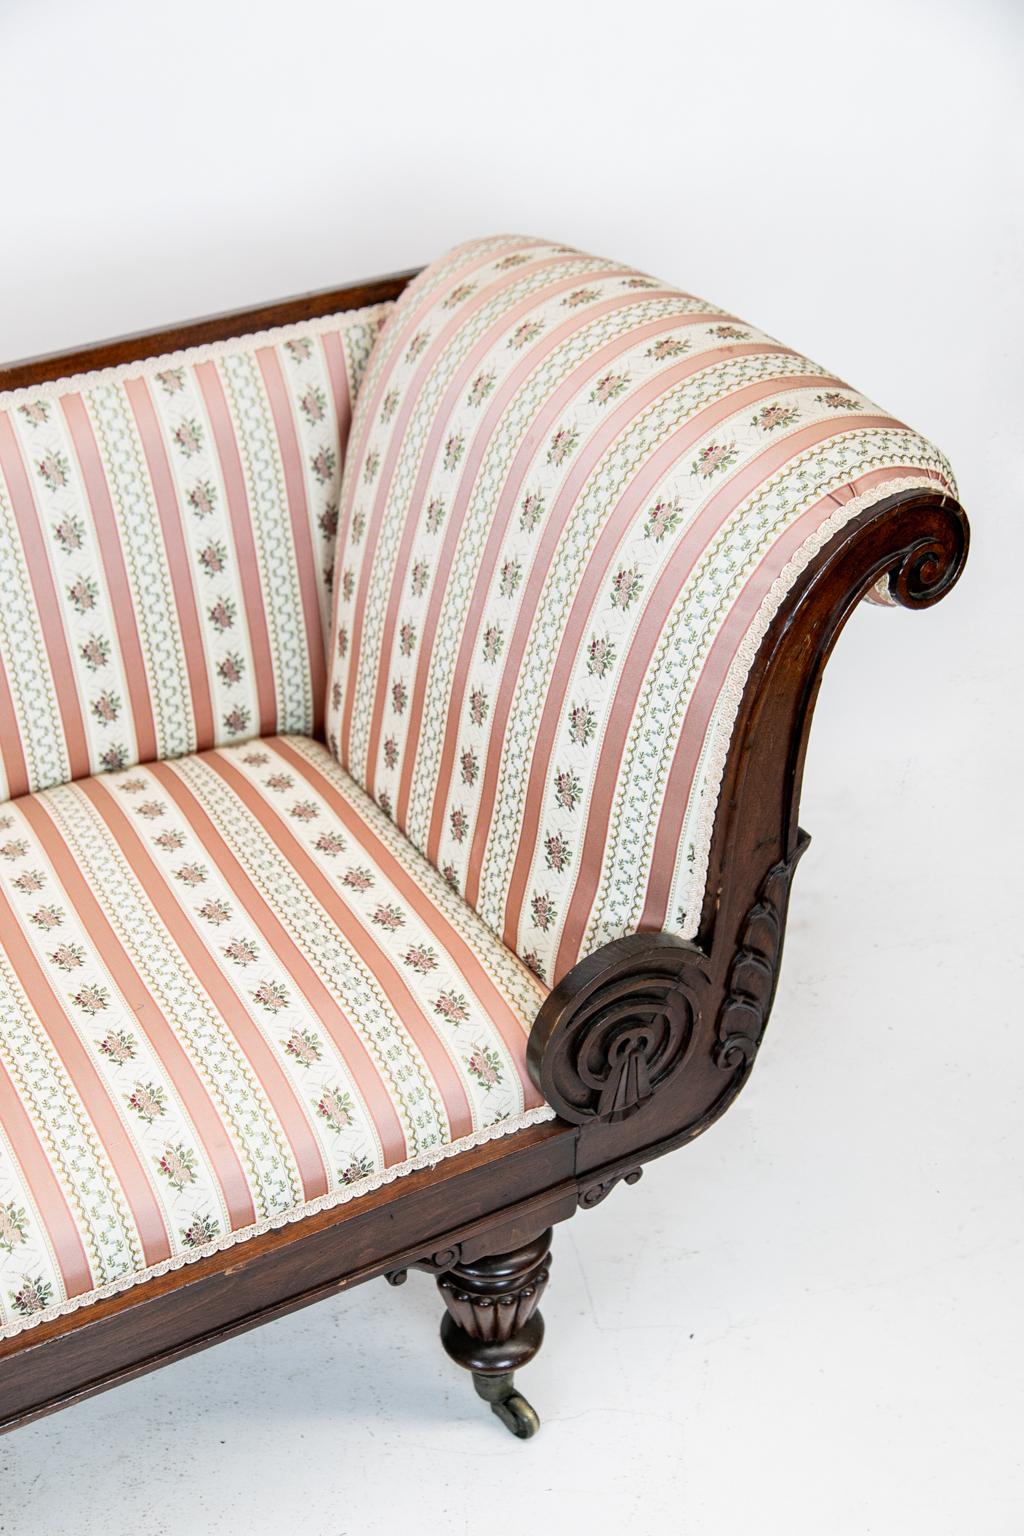 William IV mahogany chaise lounge, with reeded legs on the original brass castors, scrolled support brackets. It has stylized acanthus leaf and tassel carved on the back frame. There is arabesque scroll work on the back foot. It has newly